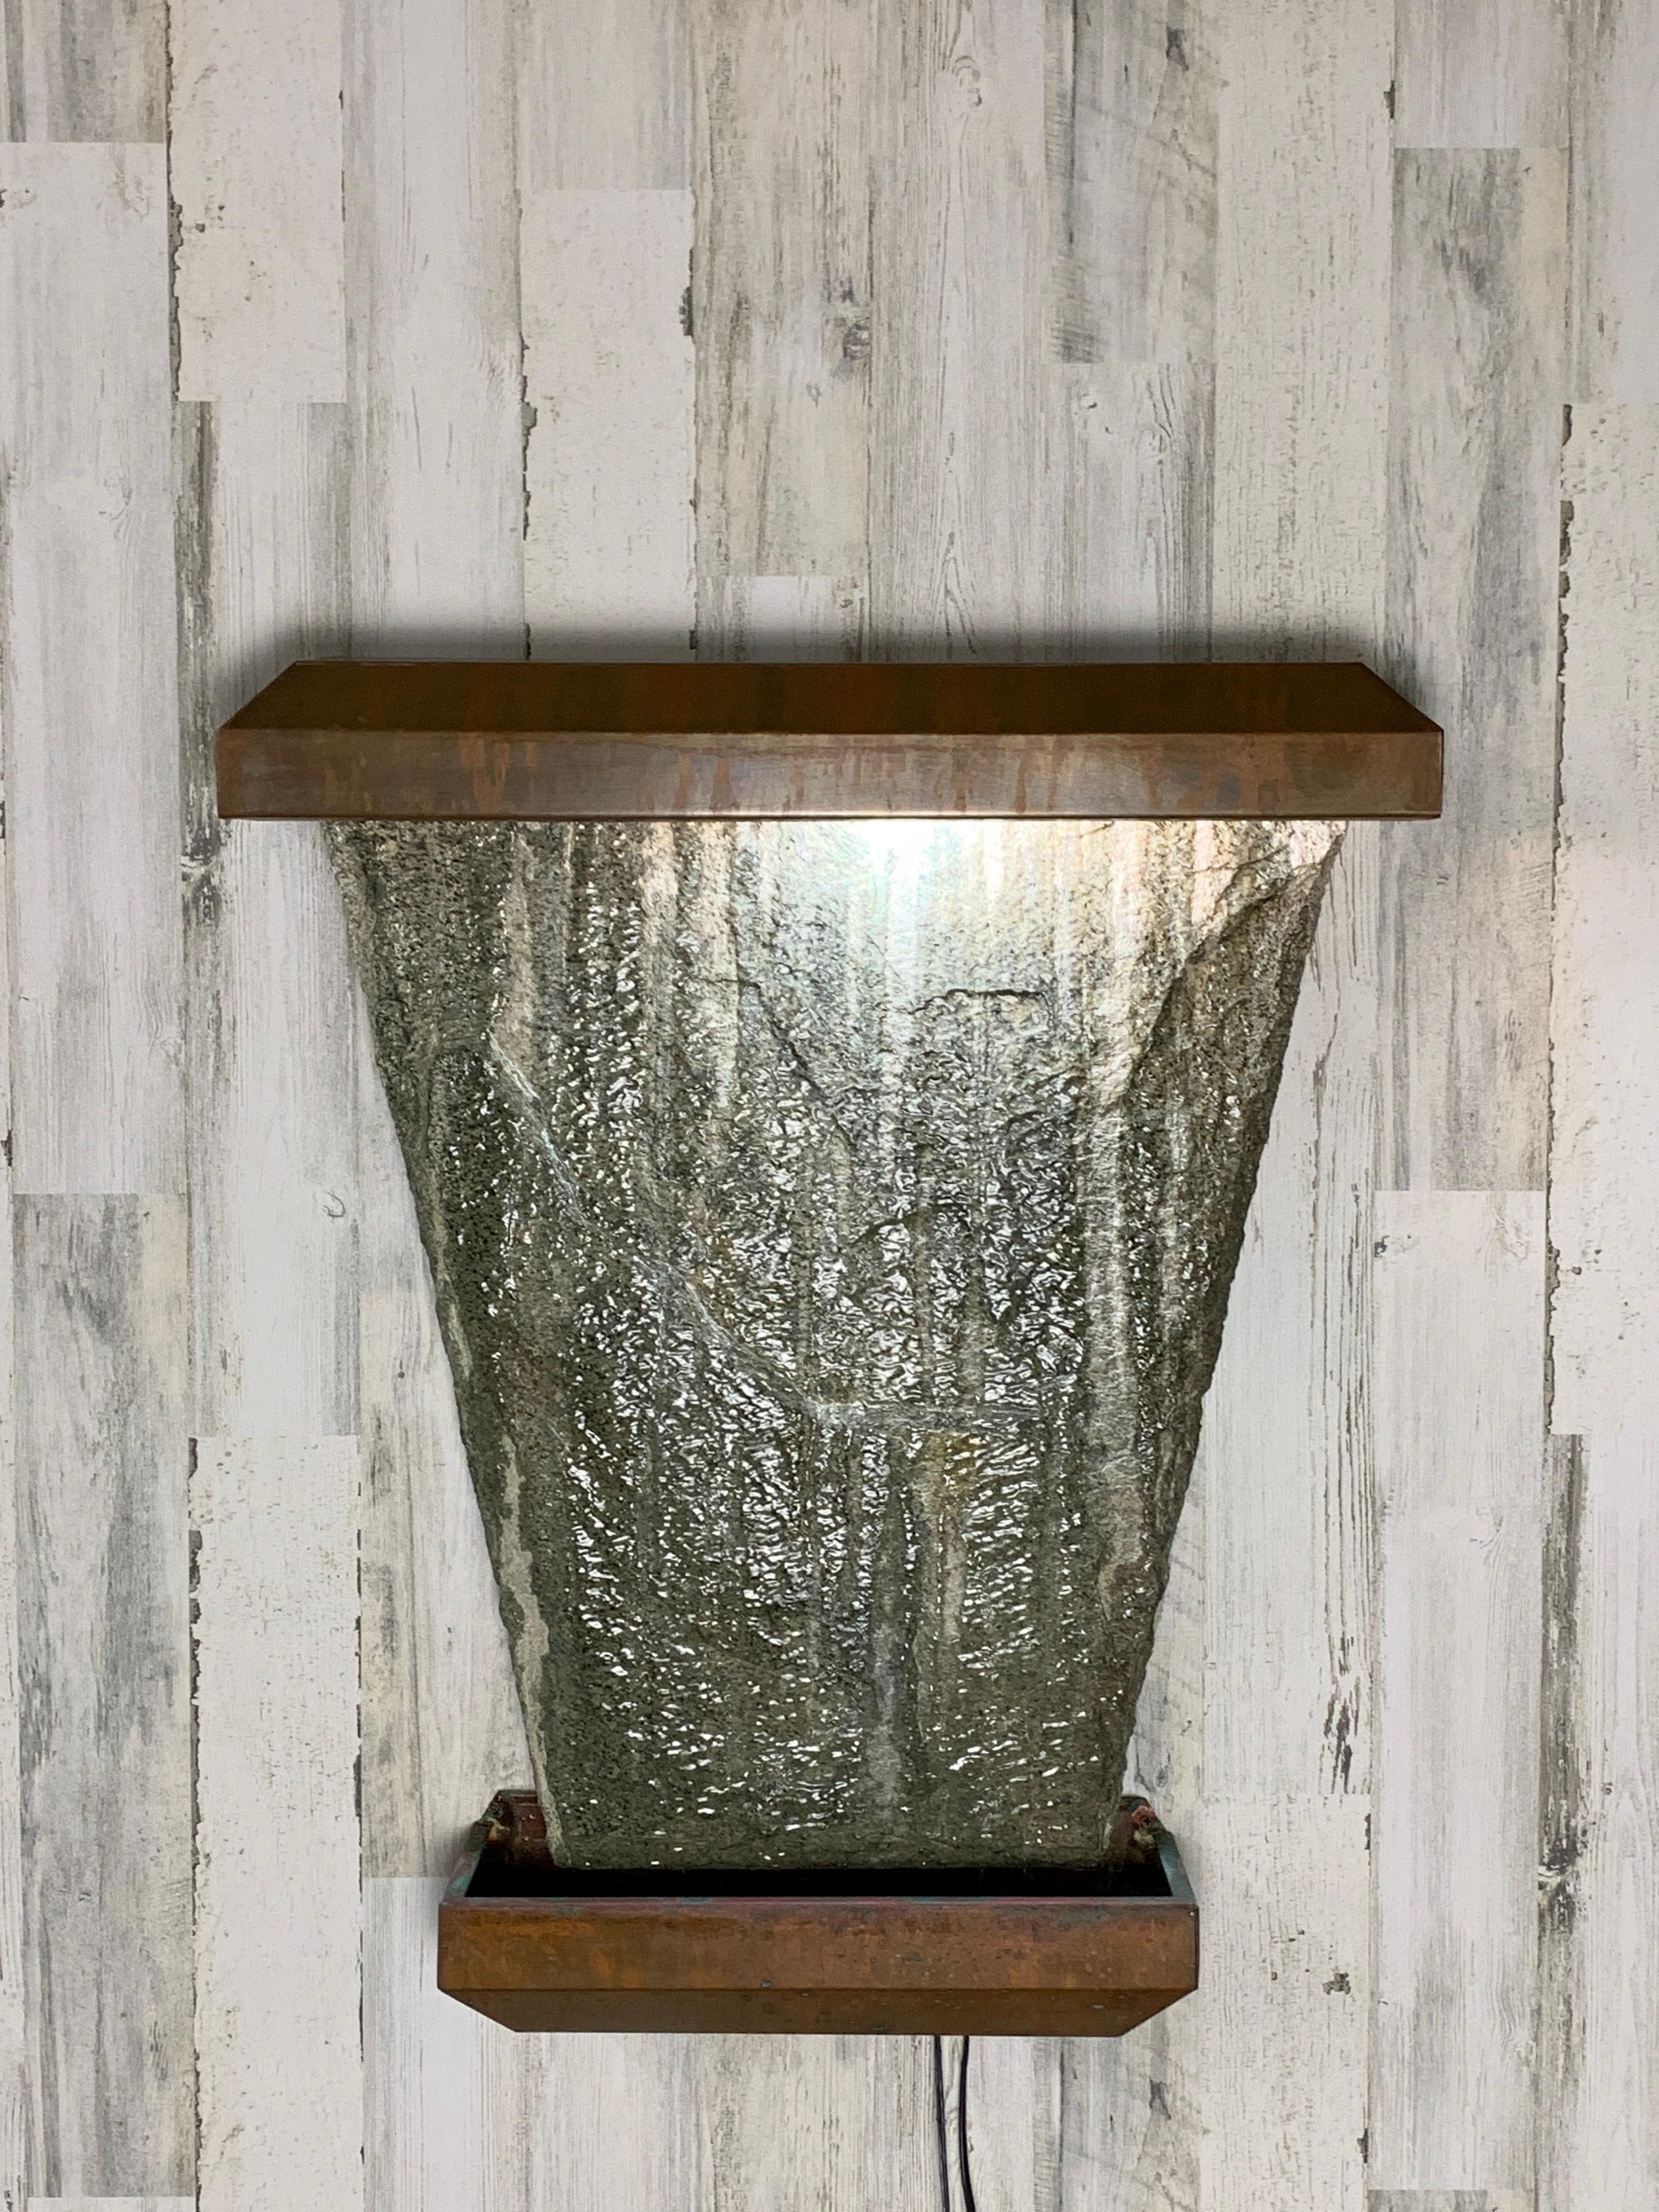 Trapezoid shaped granite wall mounted with copper lighted shroud on top and copper catch basin at the bottom. Nice patina on the copper. shipped in pieces assembly required.